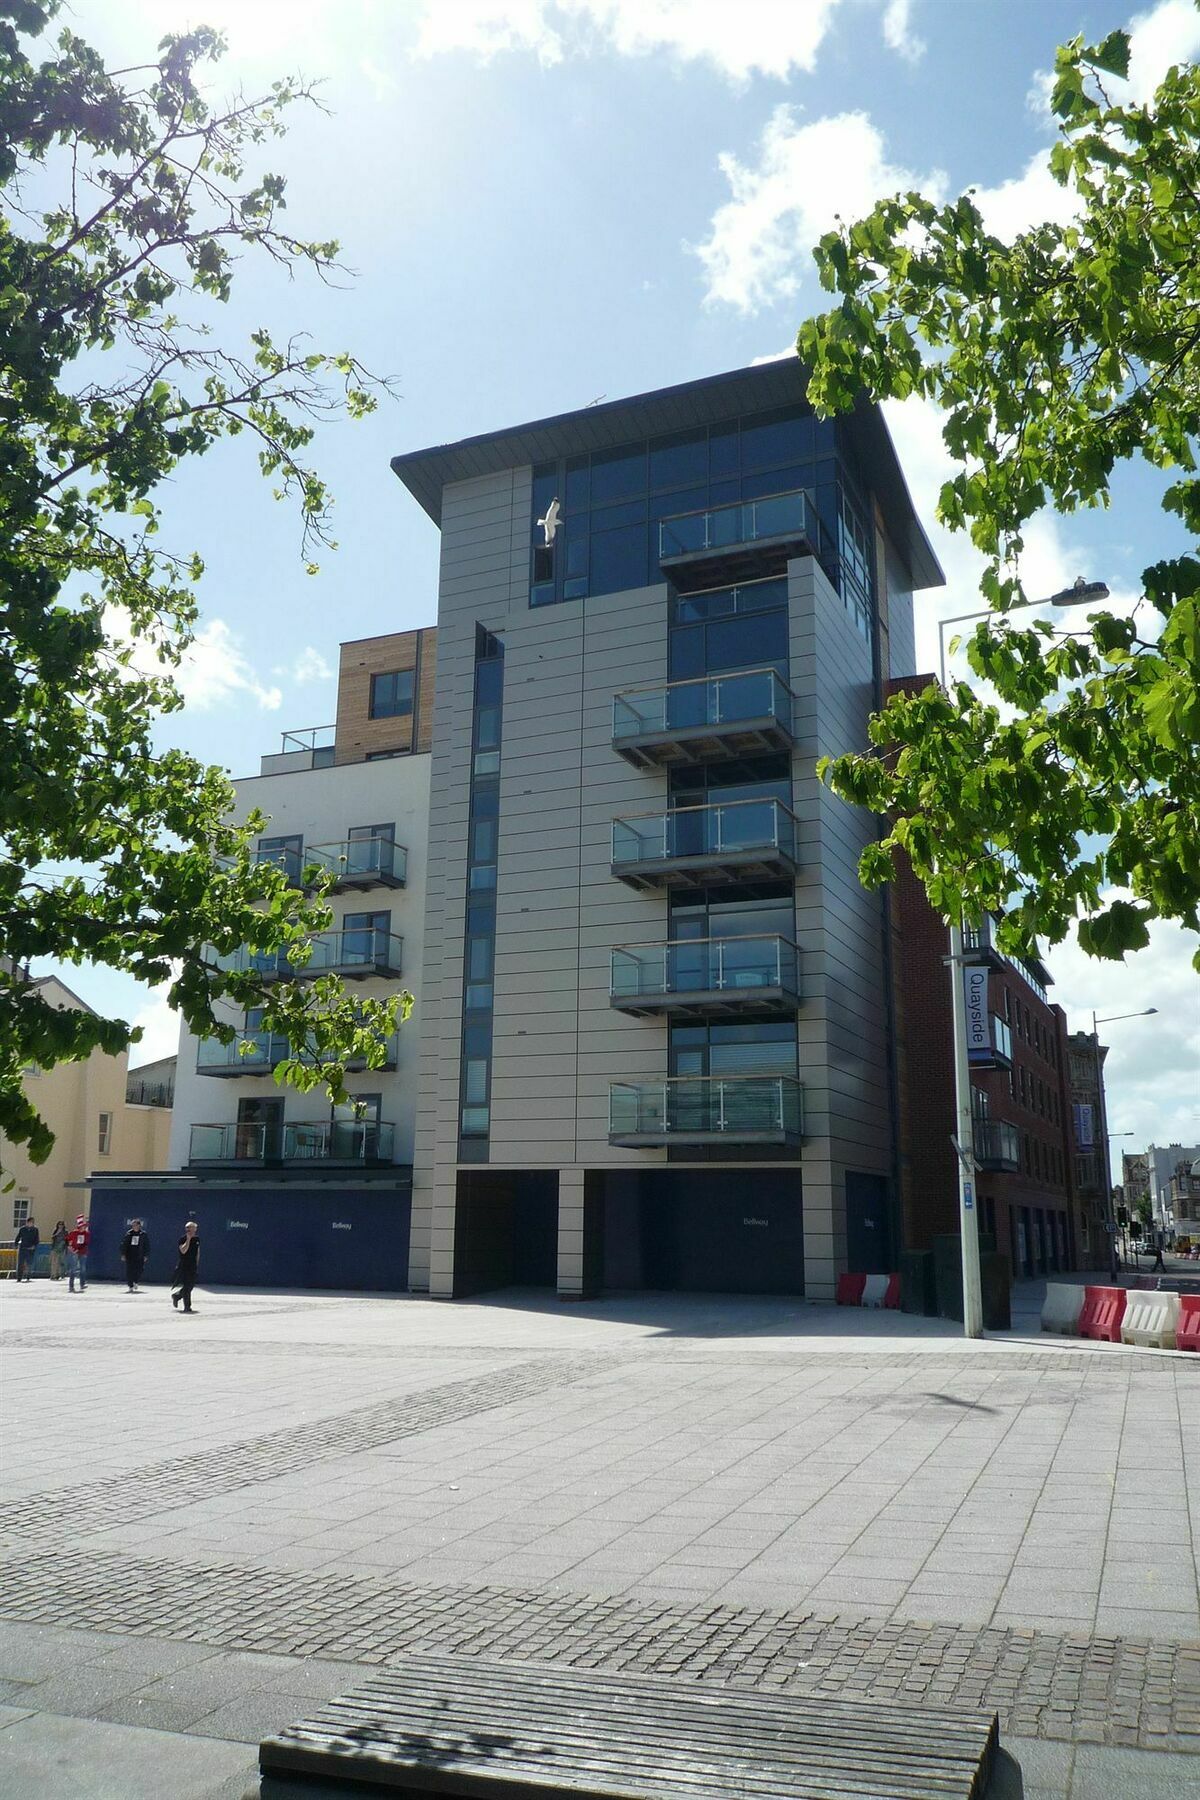 Quayside Serviced Apartments Cardiff Exterior foto